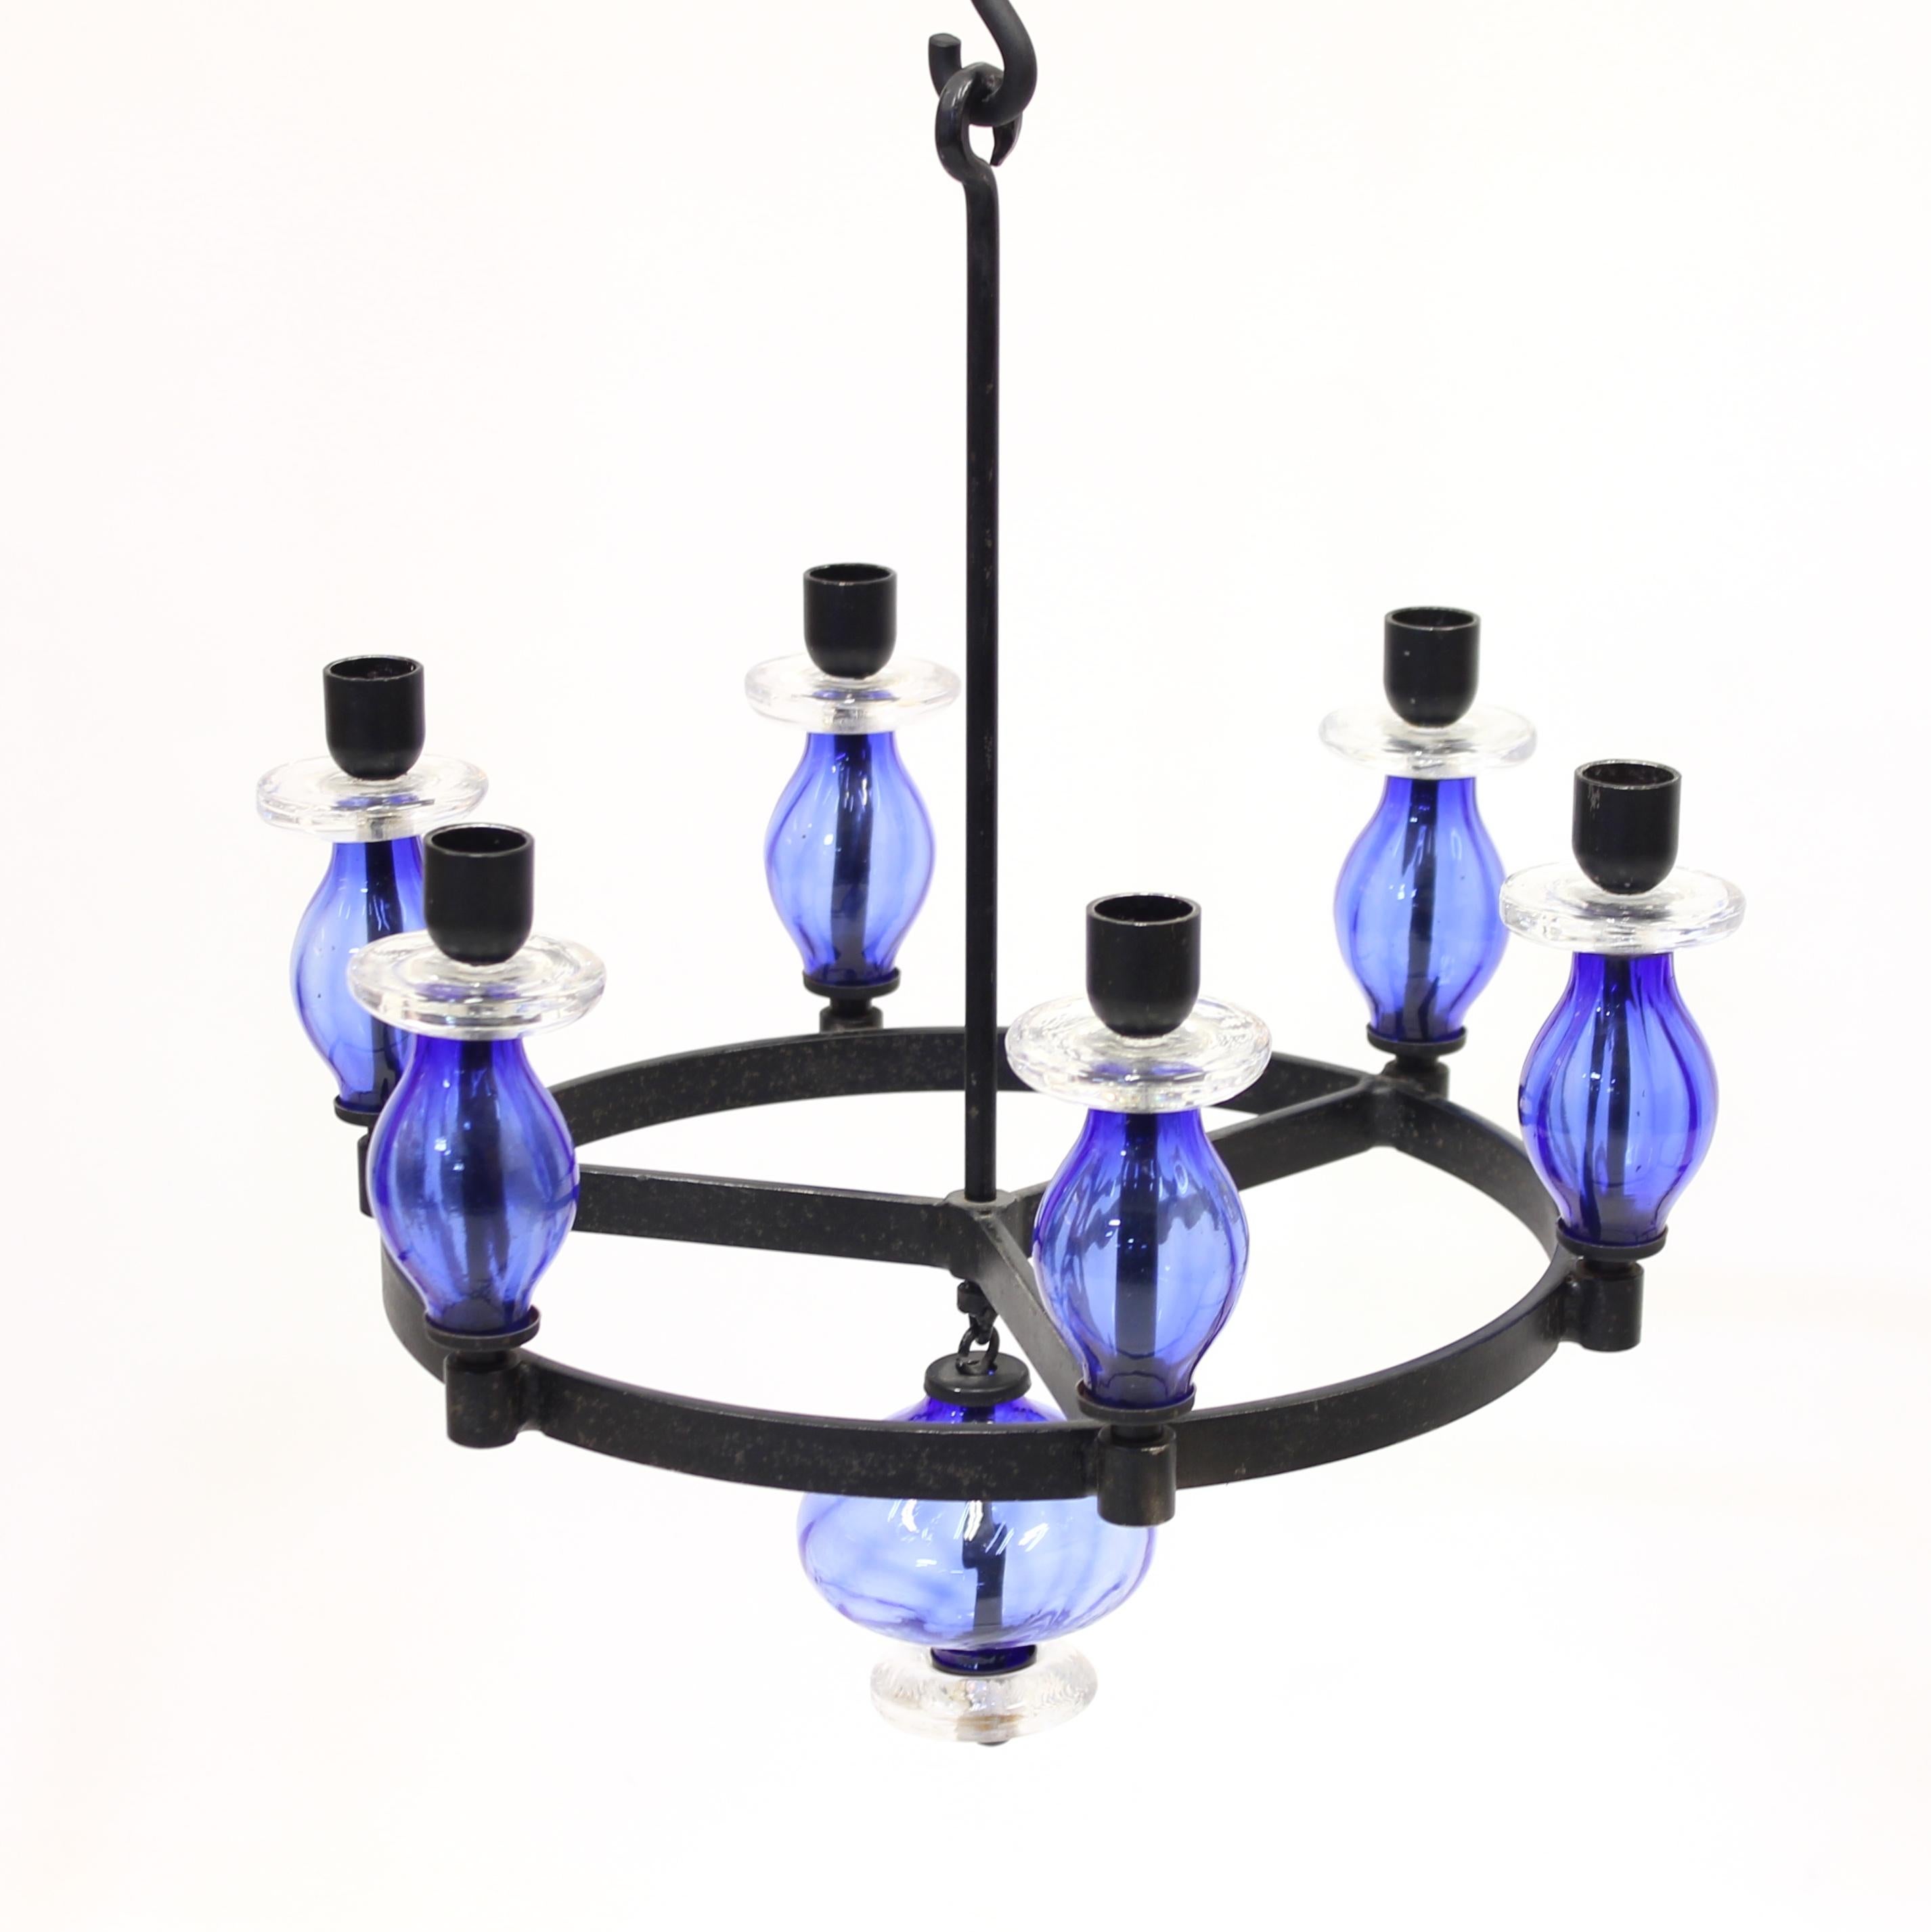 Rare Erik Höglund glass and wrought iron chandelier for 6 candles. Made by Swedish manufacturer Boda Glasbruk & Smide in the 1960s. Round black frame and hooks of wrought iron with blue and clear glass decoration. The number of hooks that the